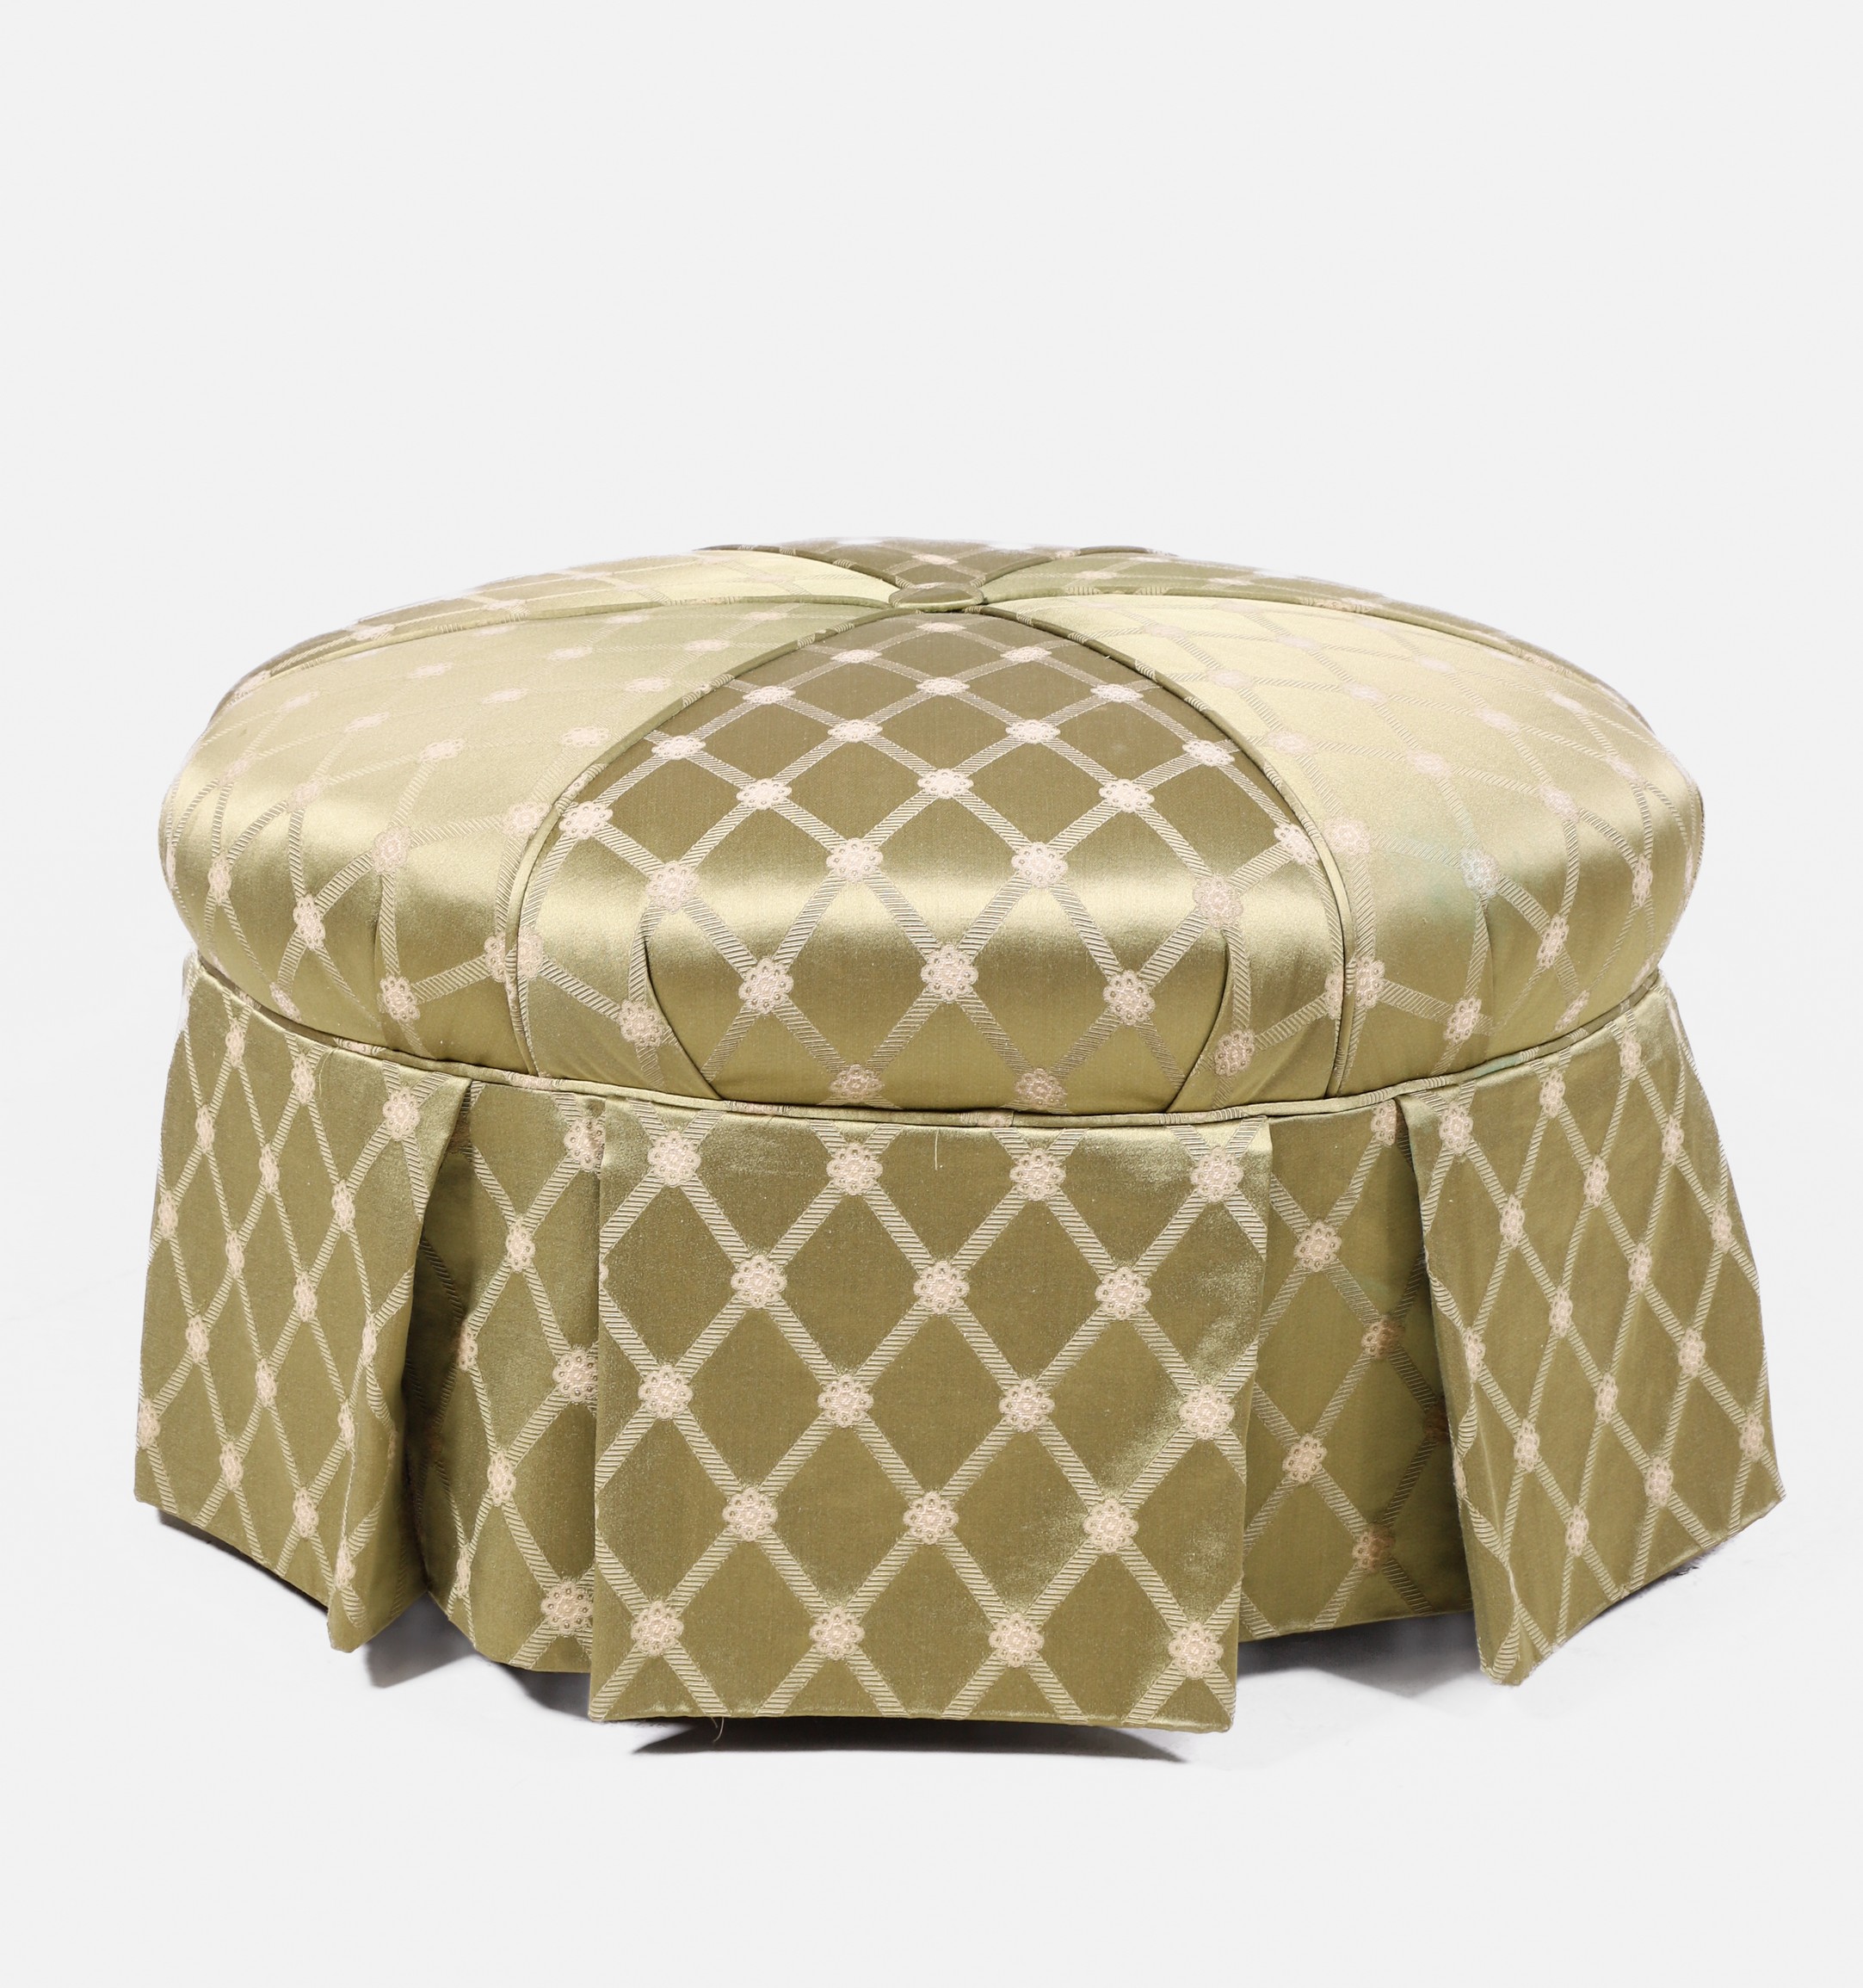 Contemporary upholstered ottoman,